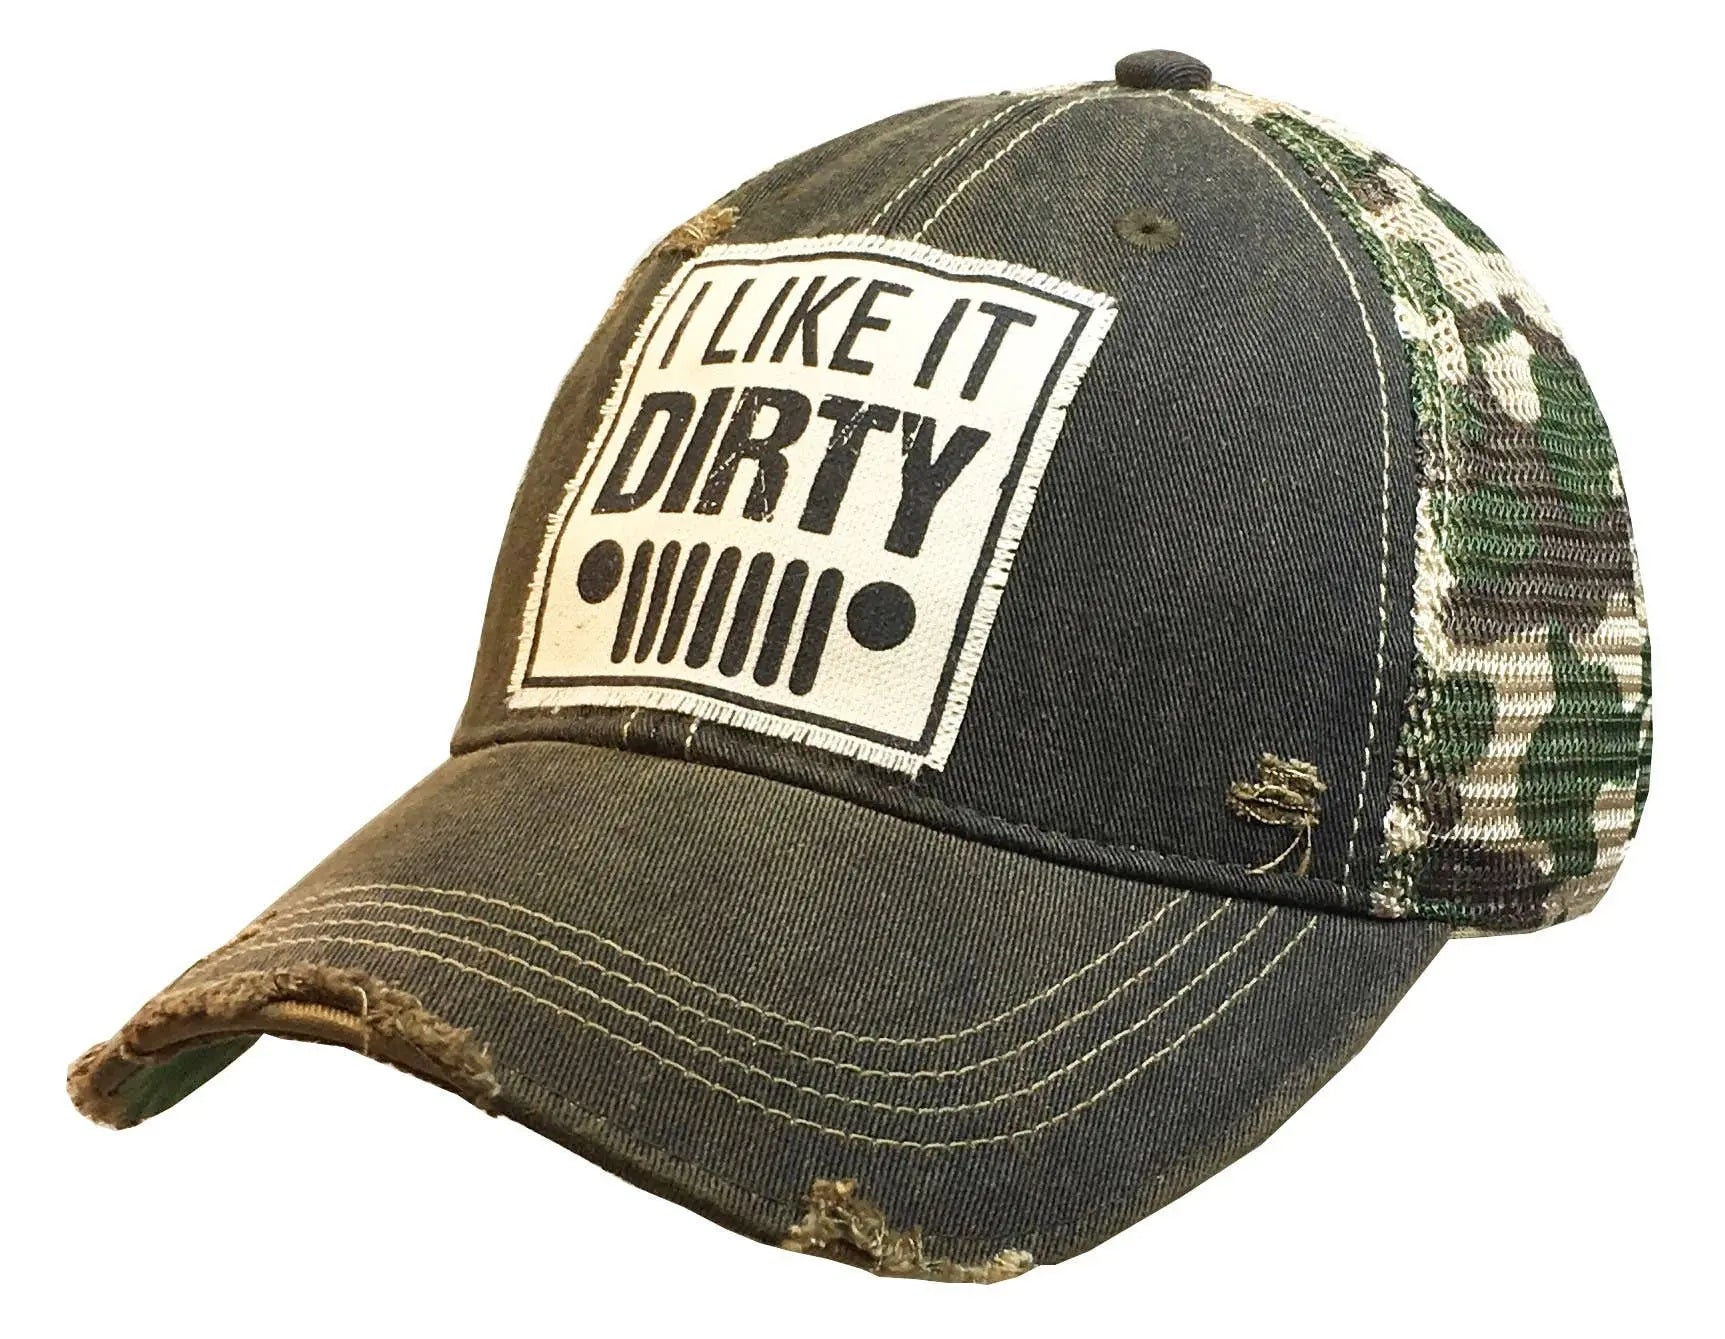 I Like It Dirty Distressed Trucker Cap - Bay-Tique